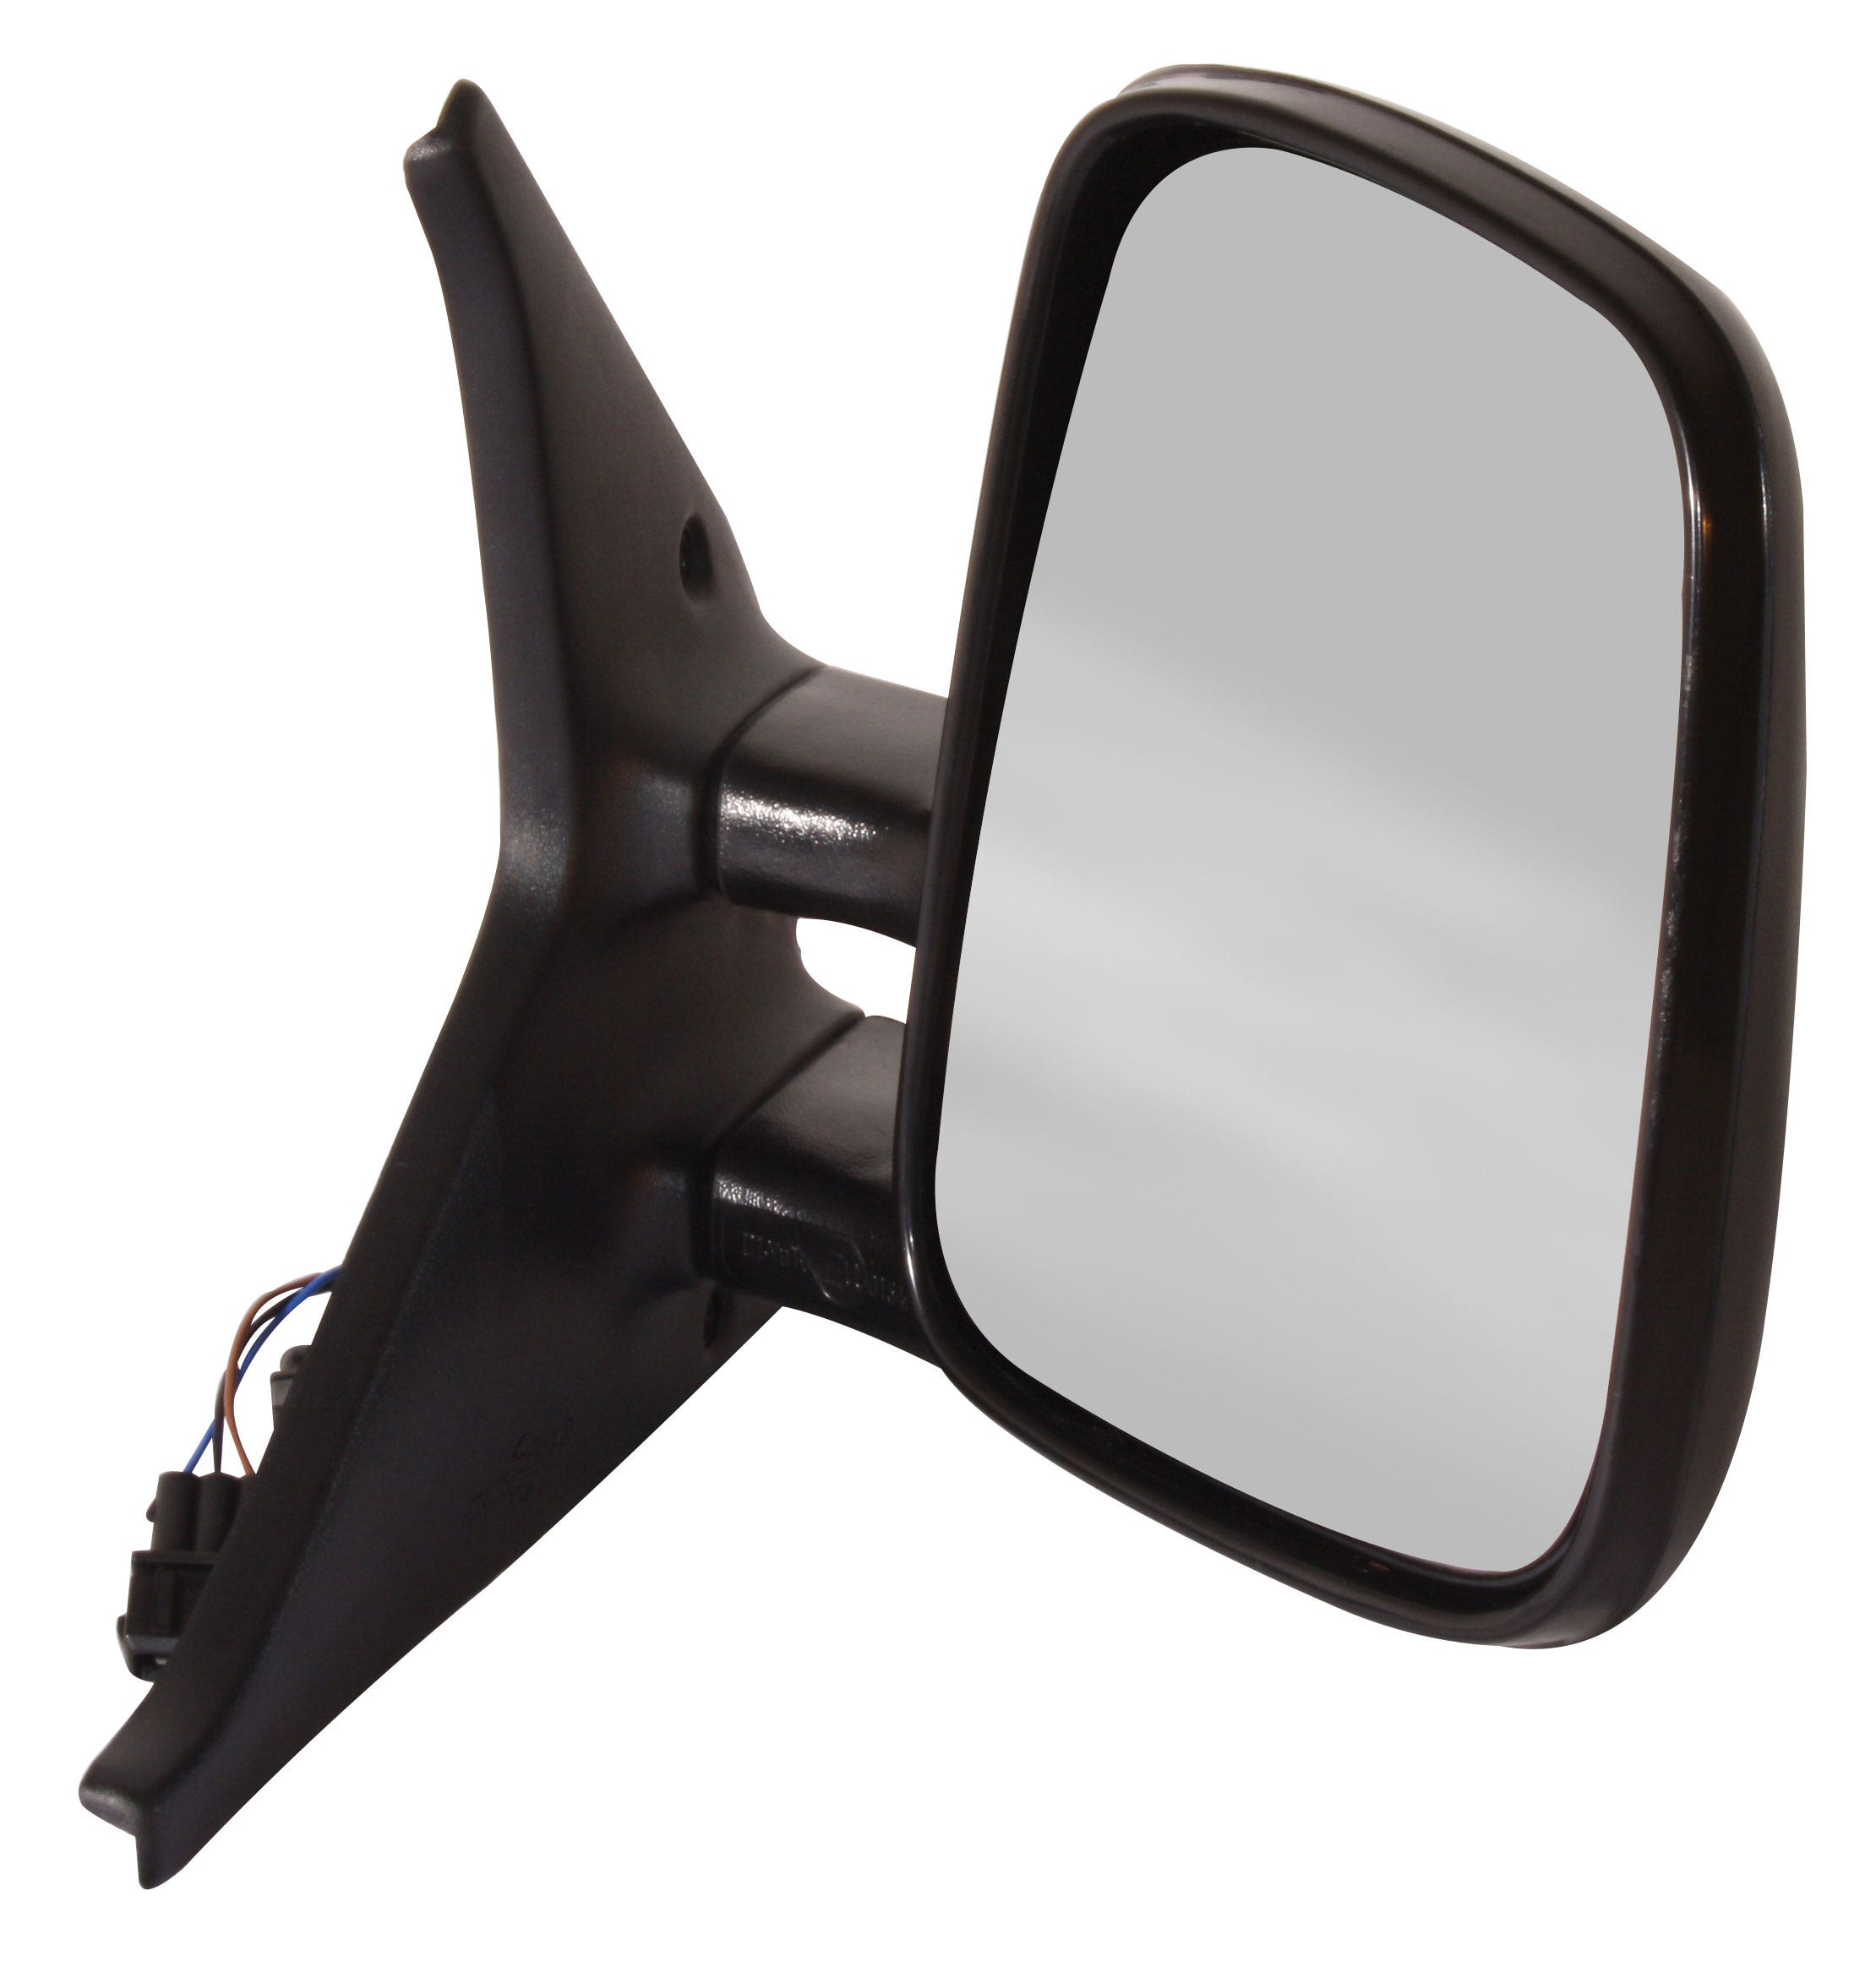 VW Transporter T4 Van 1990-2003 Non-Heated Flat Wing Mirror Glass Drivers Side